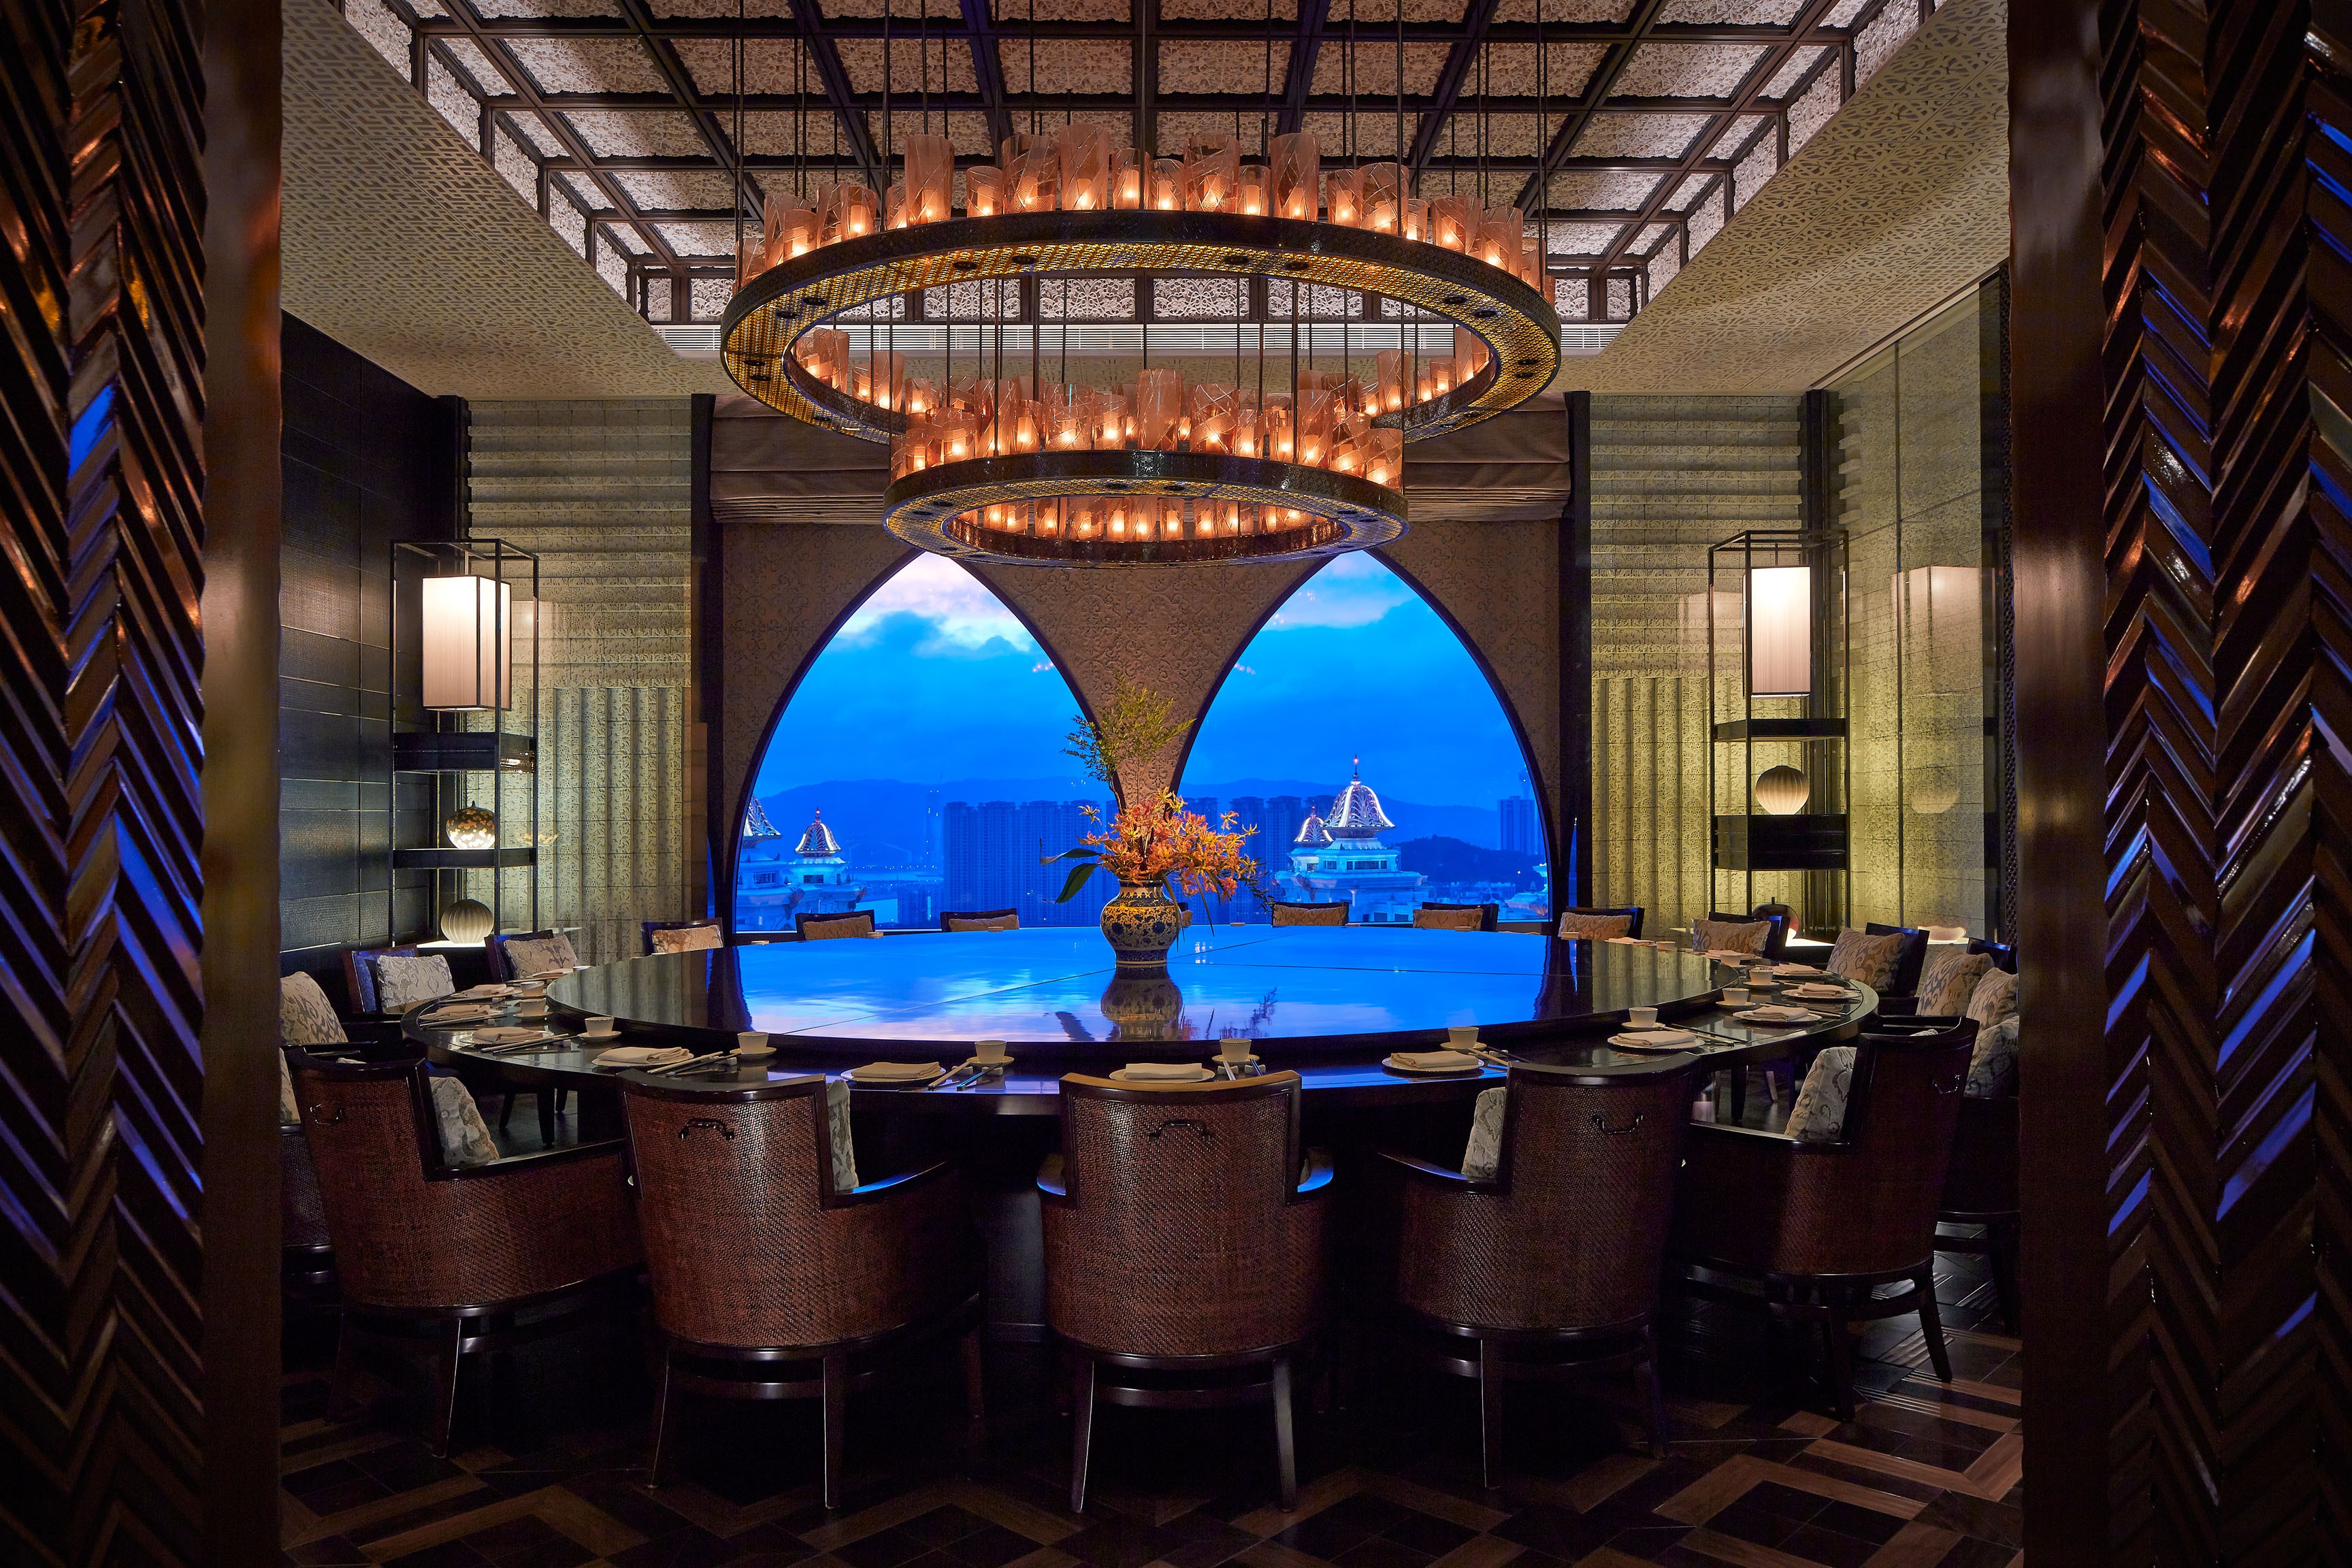 Lai Heen at The Ritz-Carlton Macau is a well-appointed Michelin-starred restaurant.